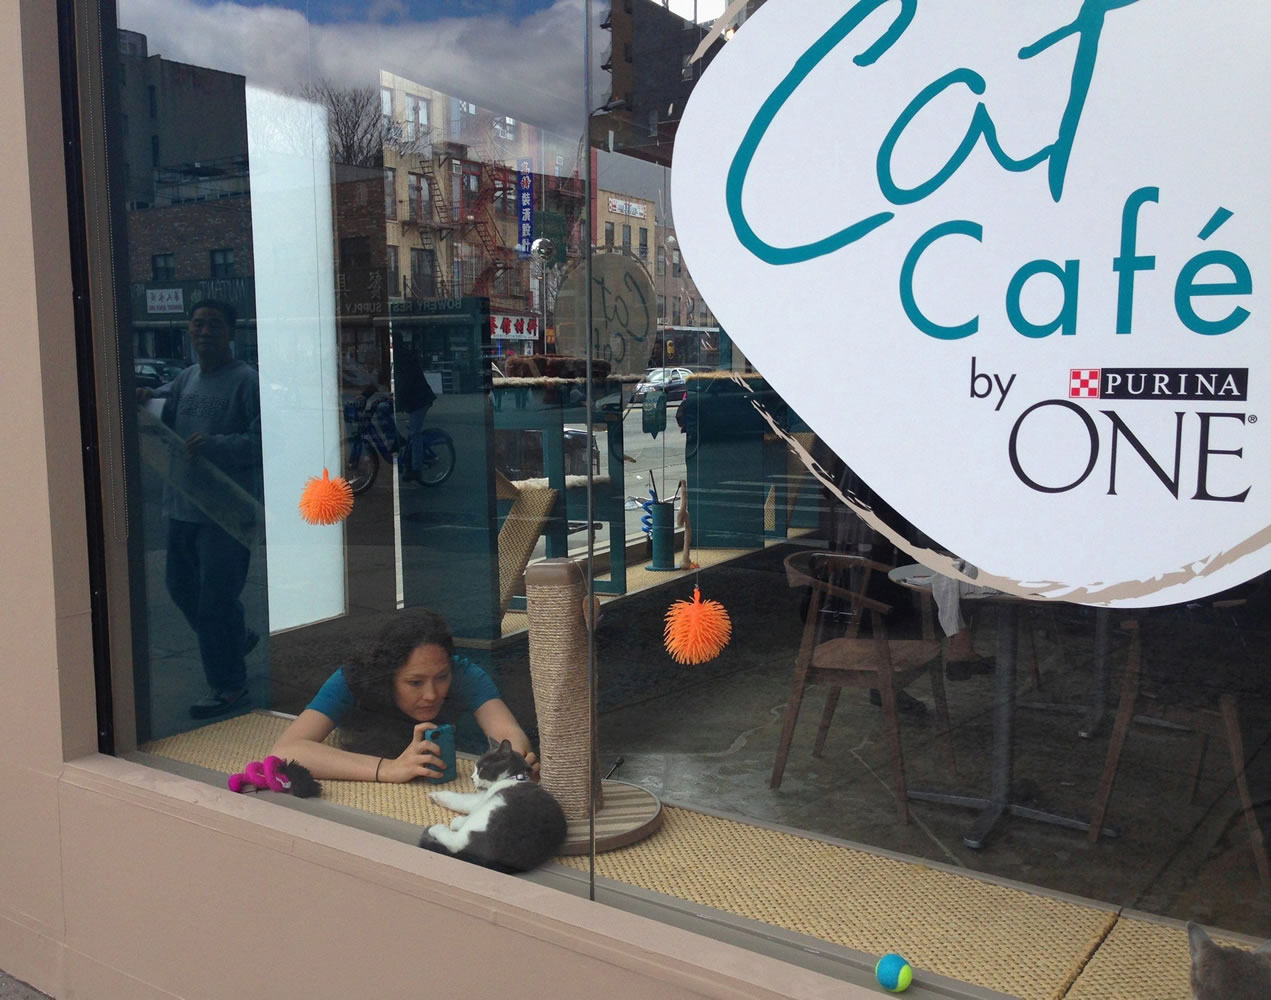 A cat enjoys some attention inside a cat cafe Wednesday in Manhattan. The pop-up cafe will be open four days and is designed to encourage adoption and let humans hang out with friendly cats.